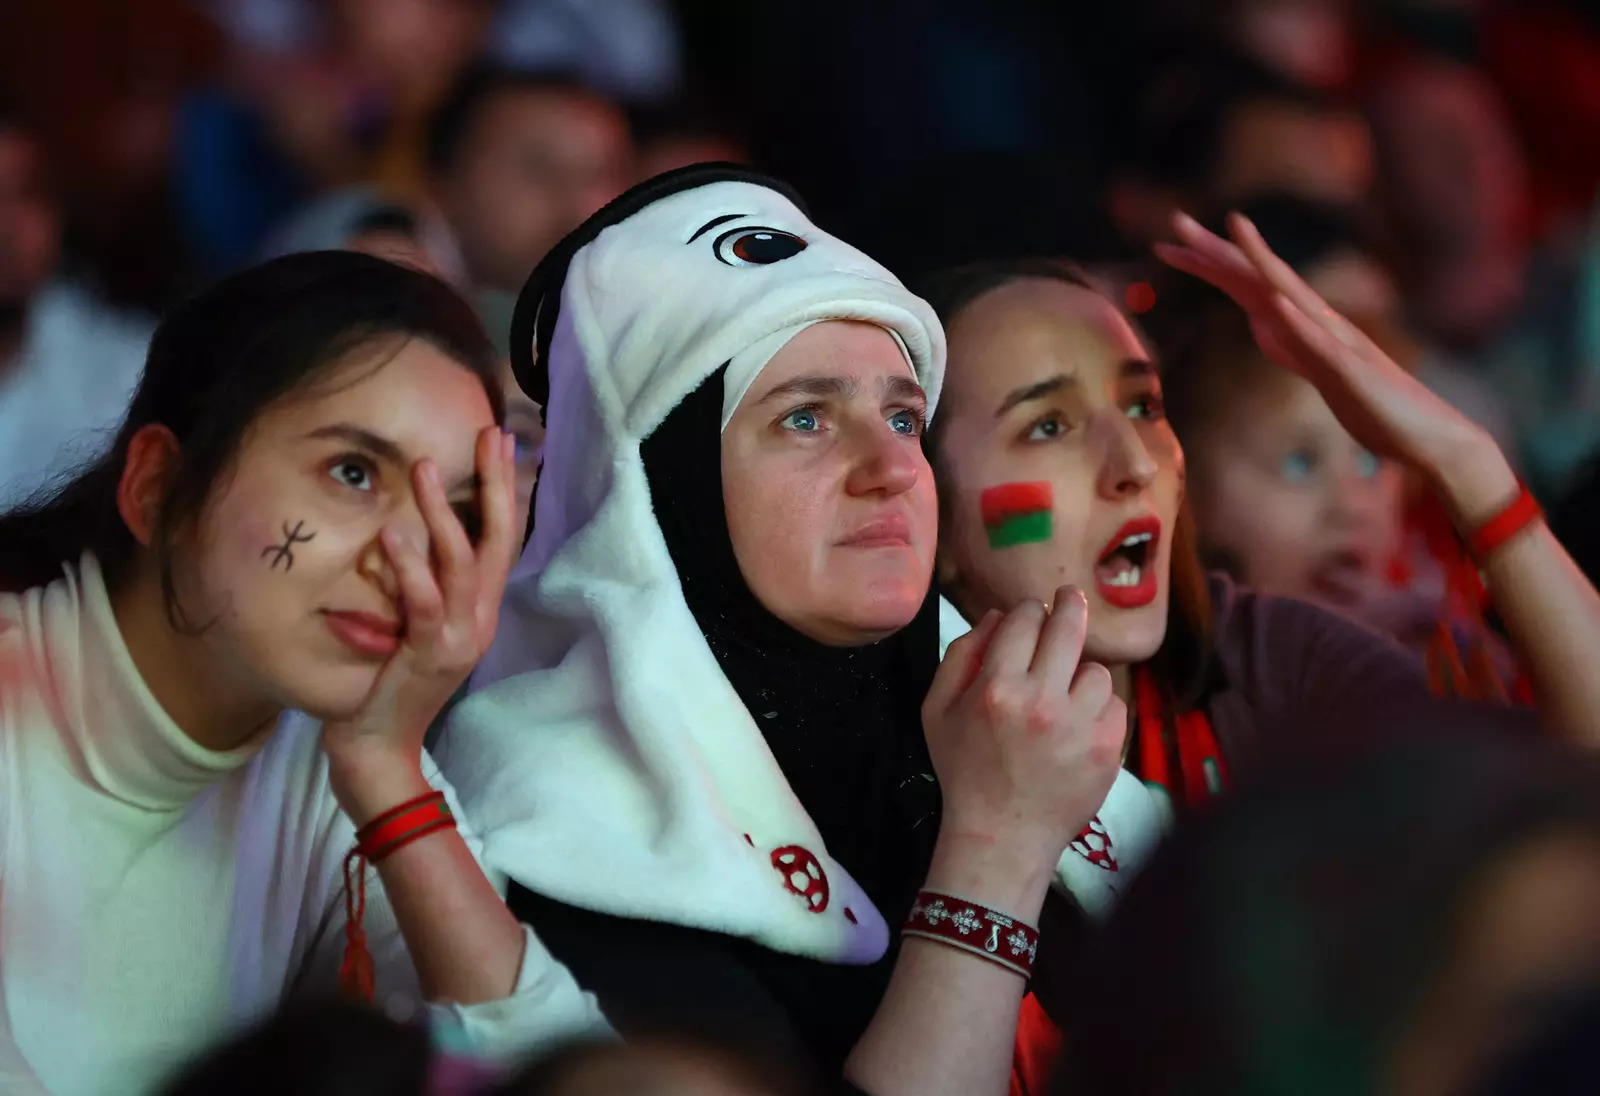 These images capture triumph and tears at FIFA World Cup 2022